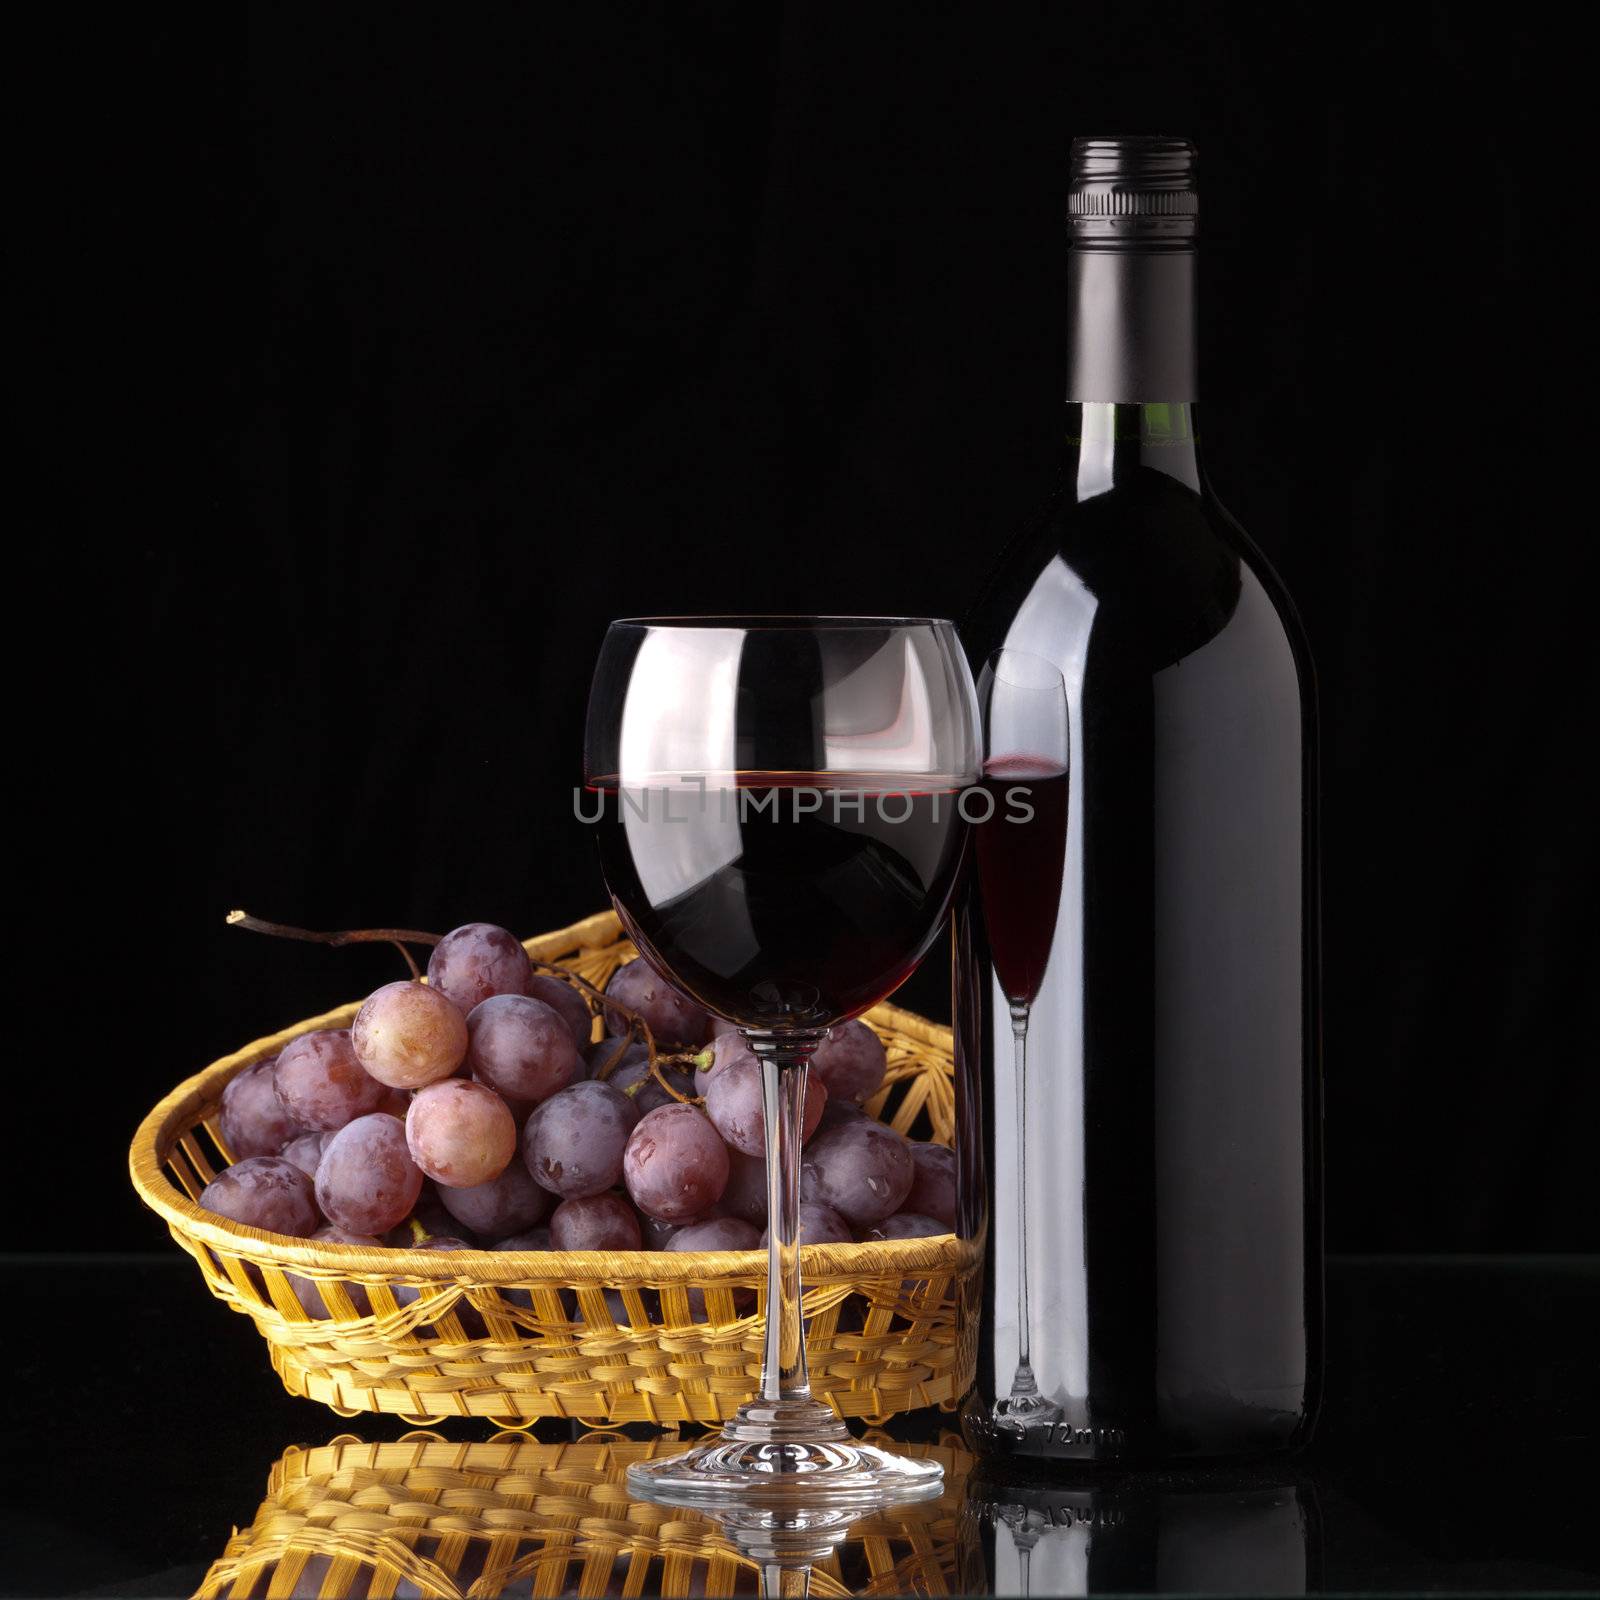 A full bottle of red wine, a glass of wine and black grapes in a wicker basket on a black background